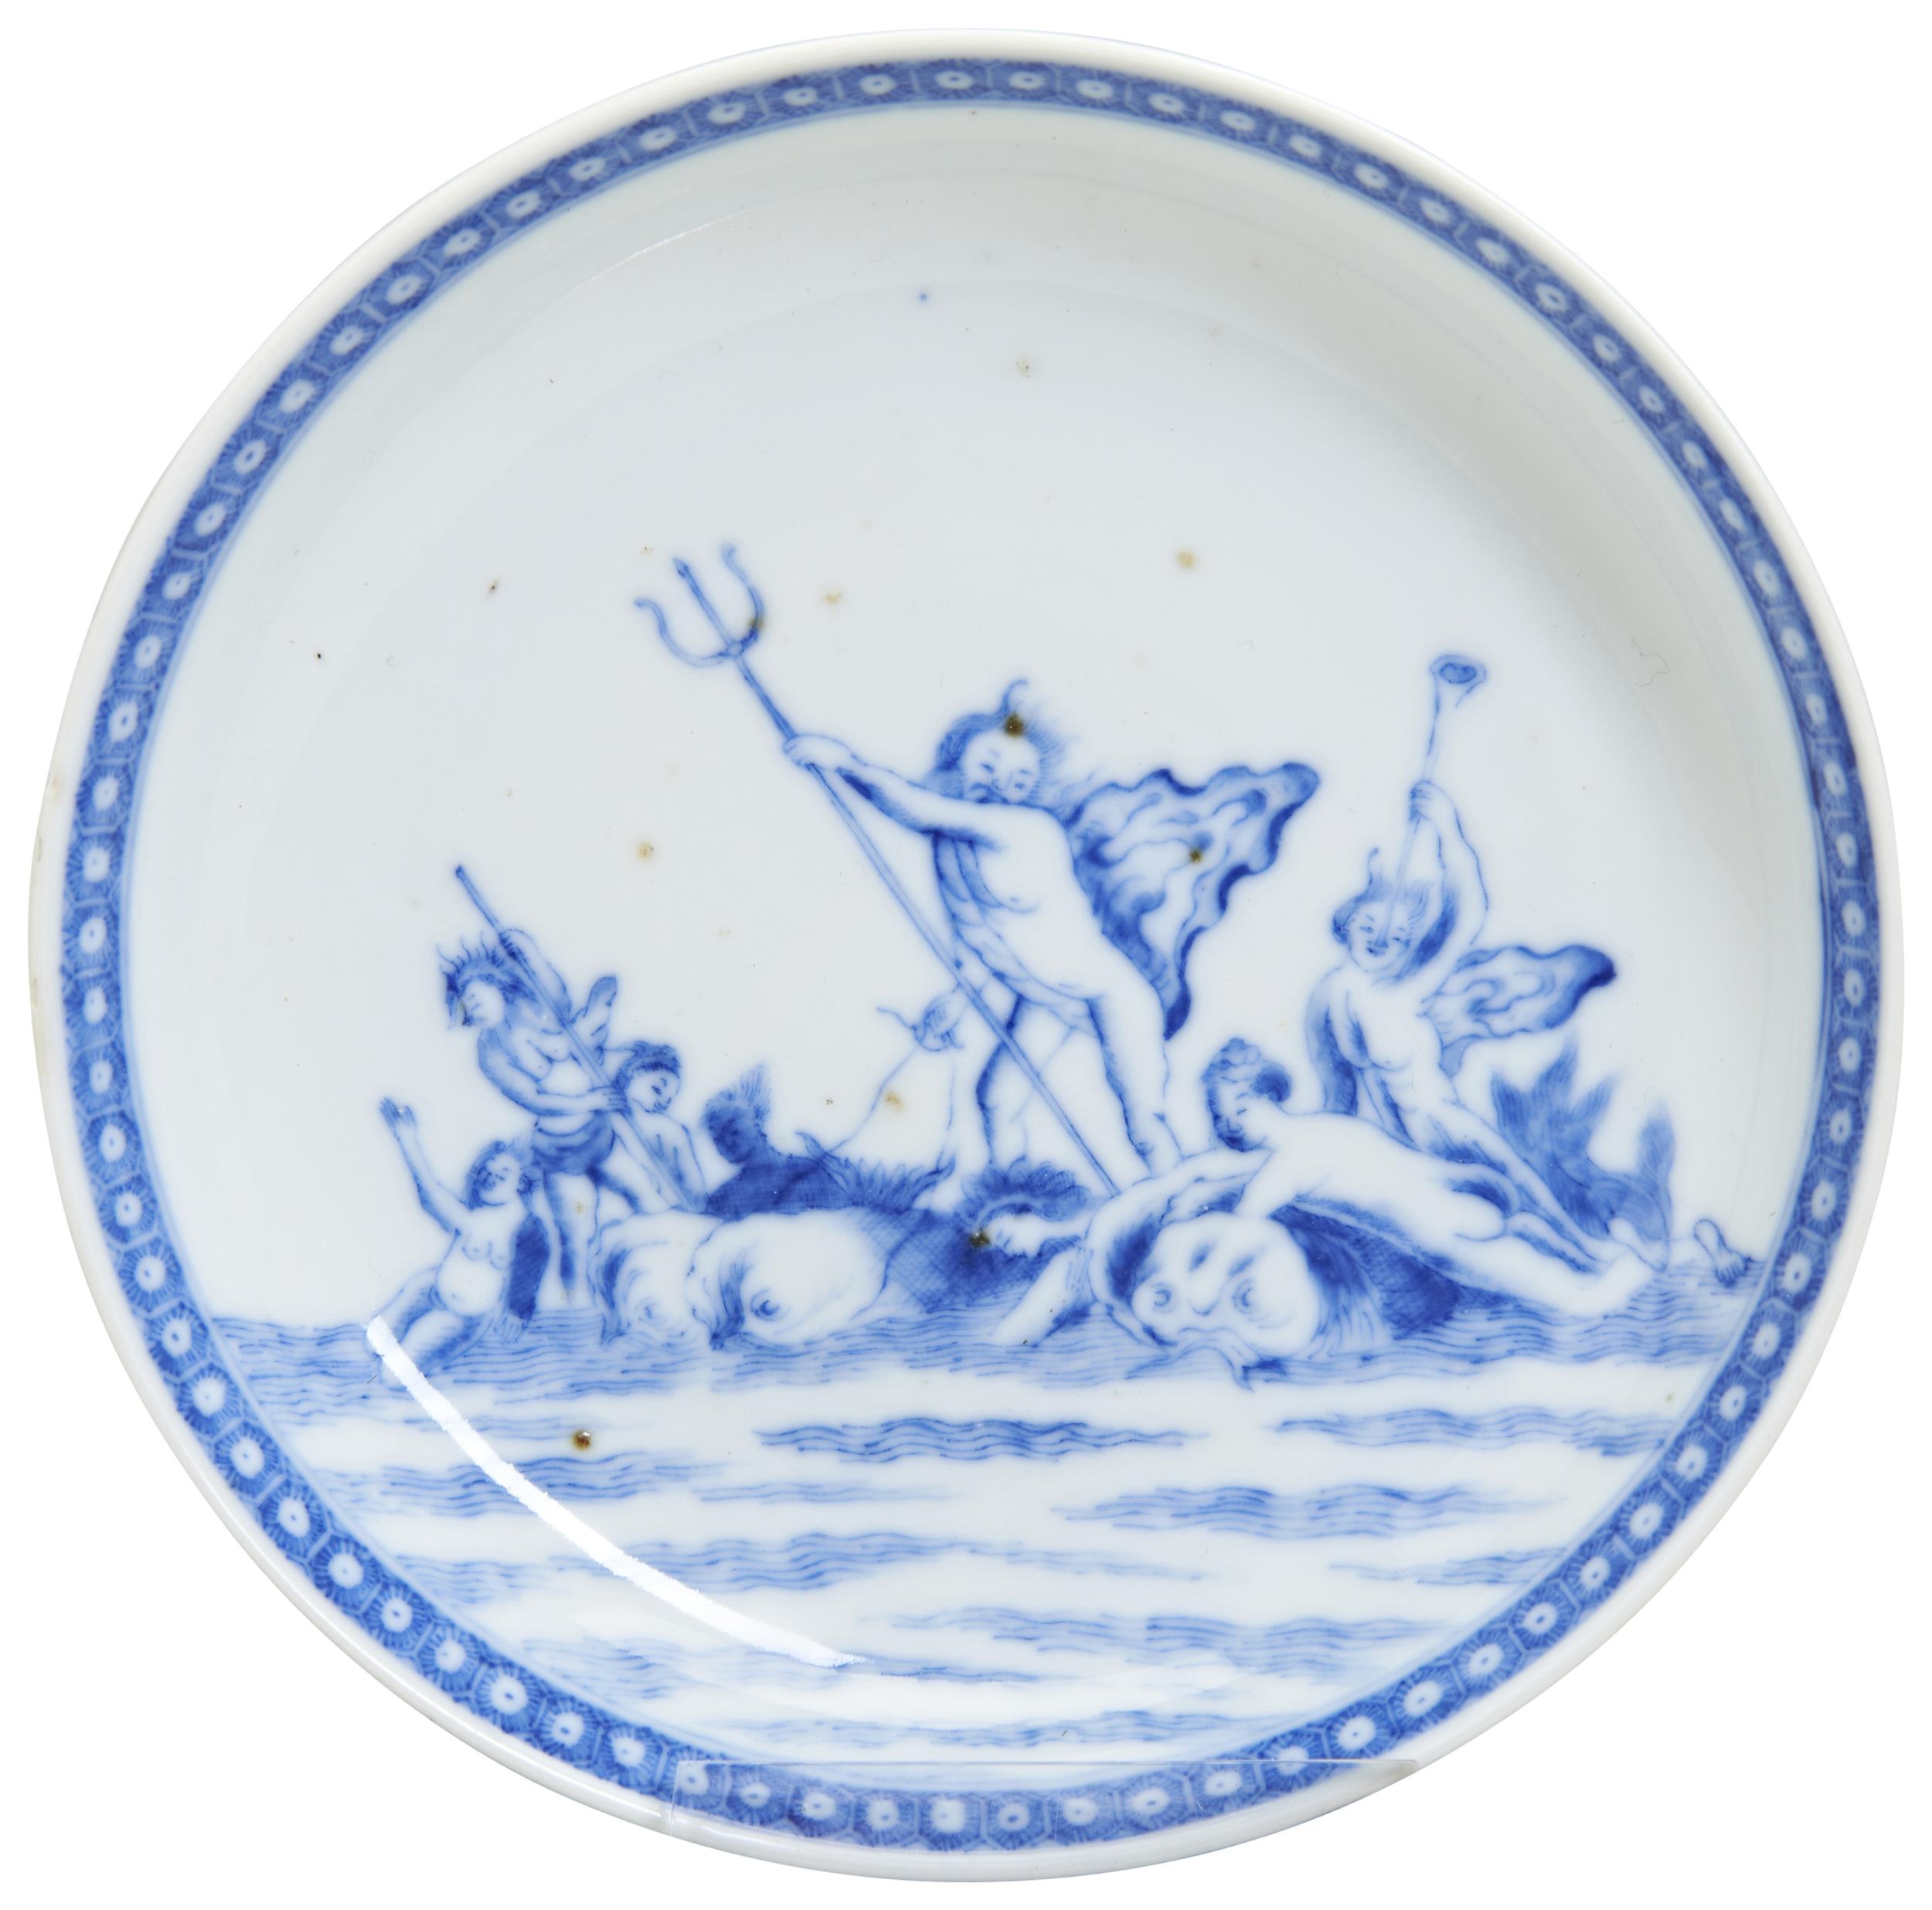 A BLUE AND WHITE 'EUROPEAN-SUBJECT' DISH  QING DYNASTY, 18TH CENTURY probably made for the Dutch